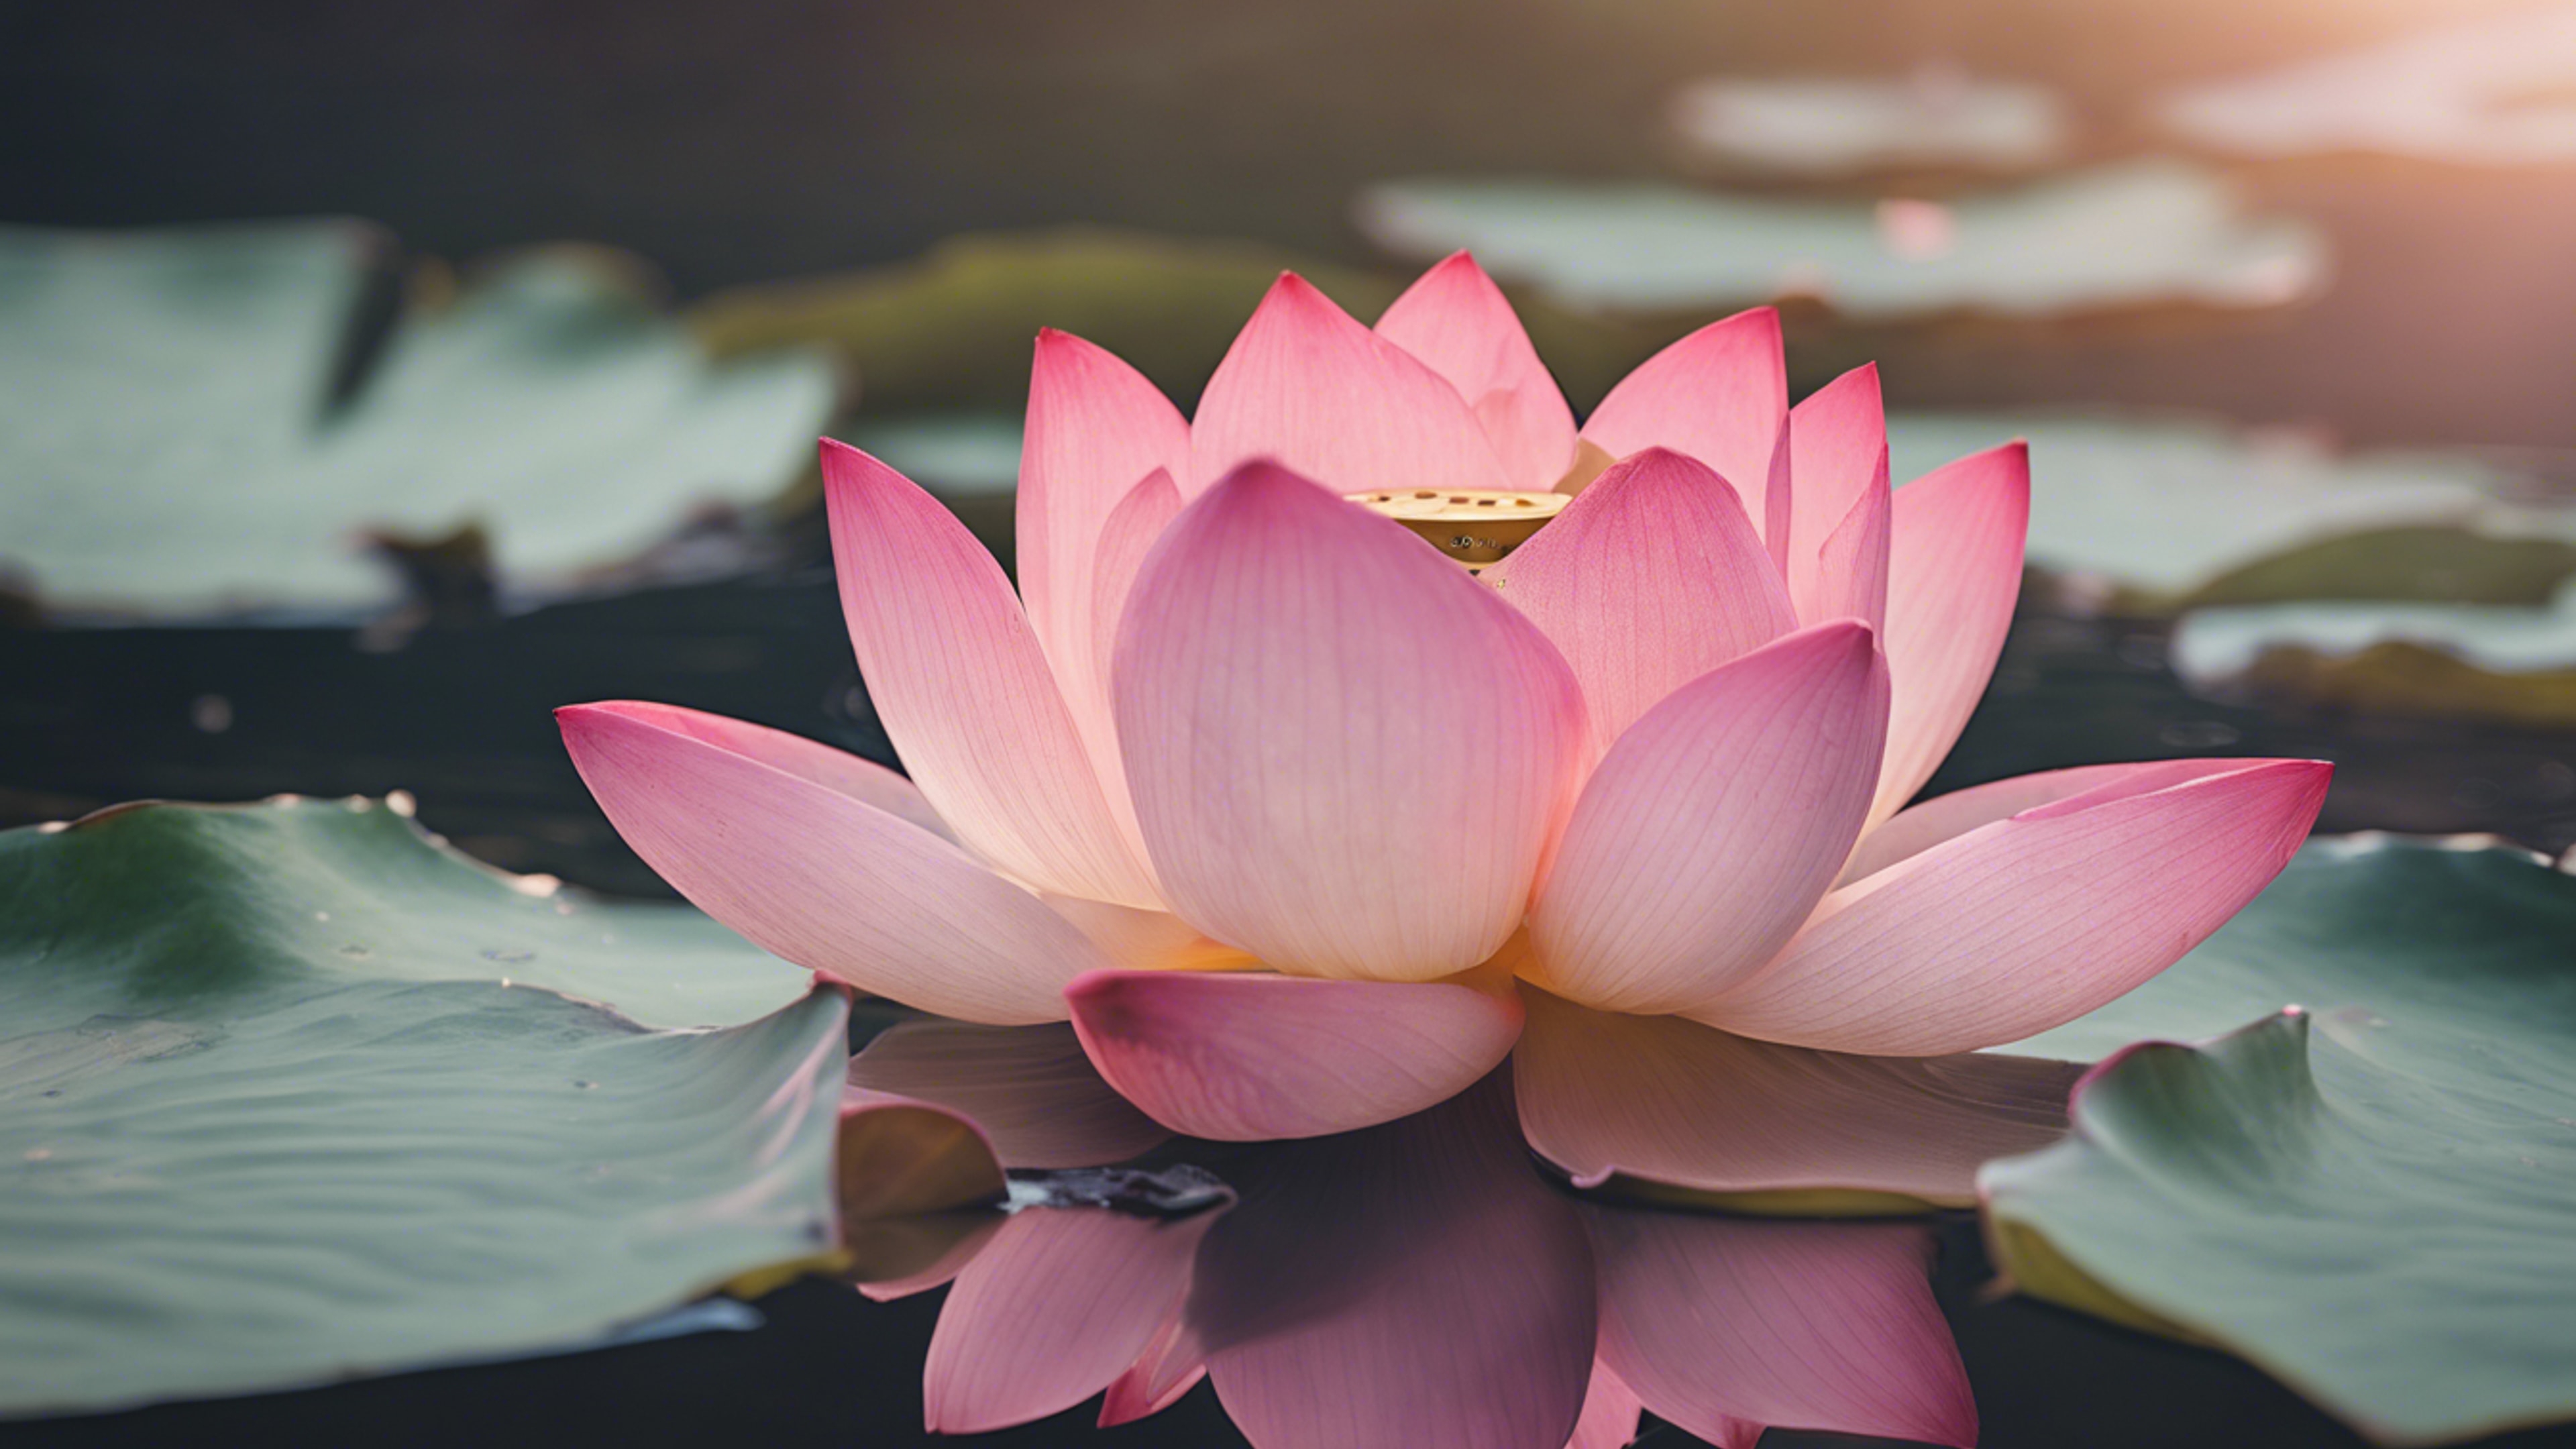 A single bloom of a pink lotus flower floating in a serene pond.壁紙[b89bdb6ca1c646bab109]